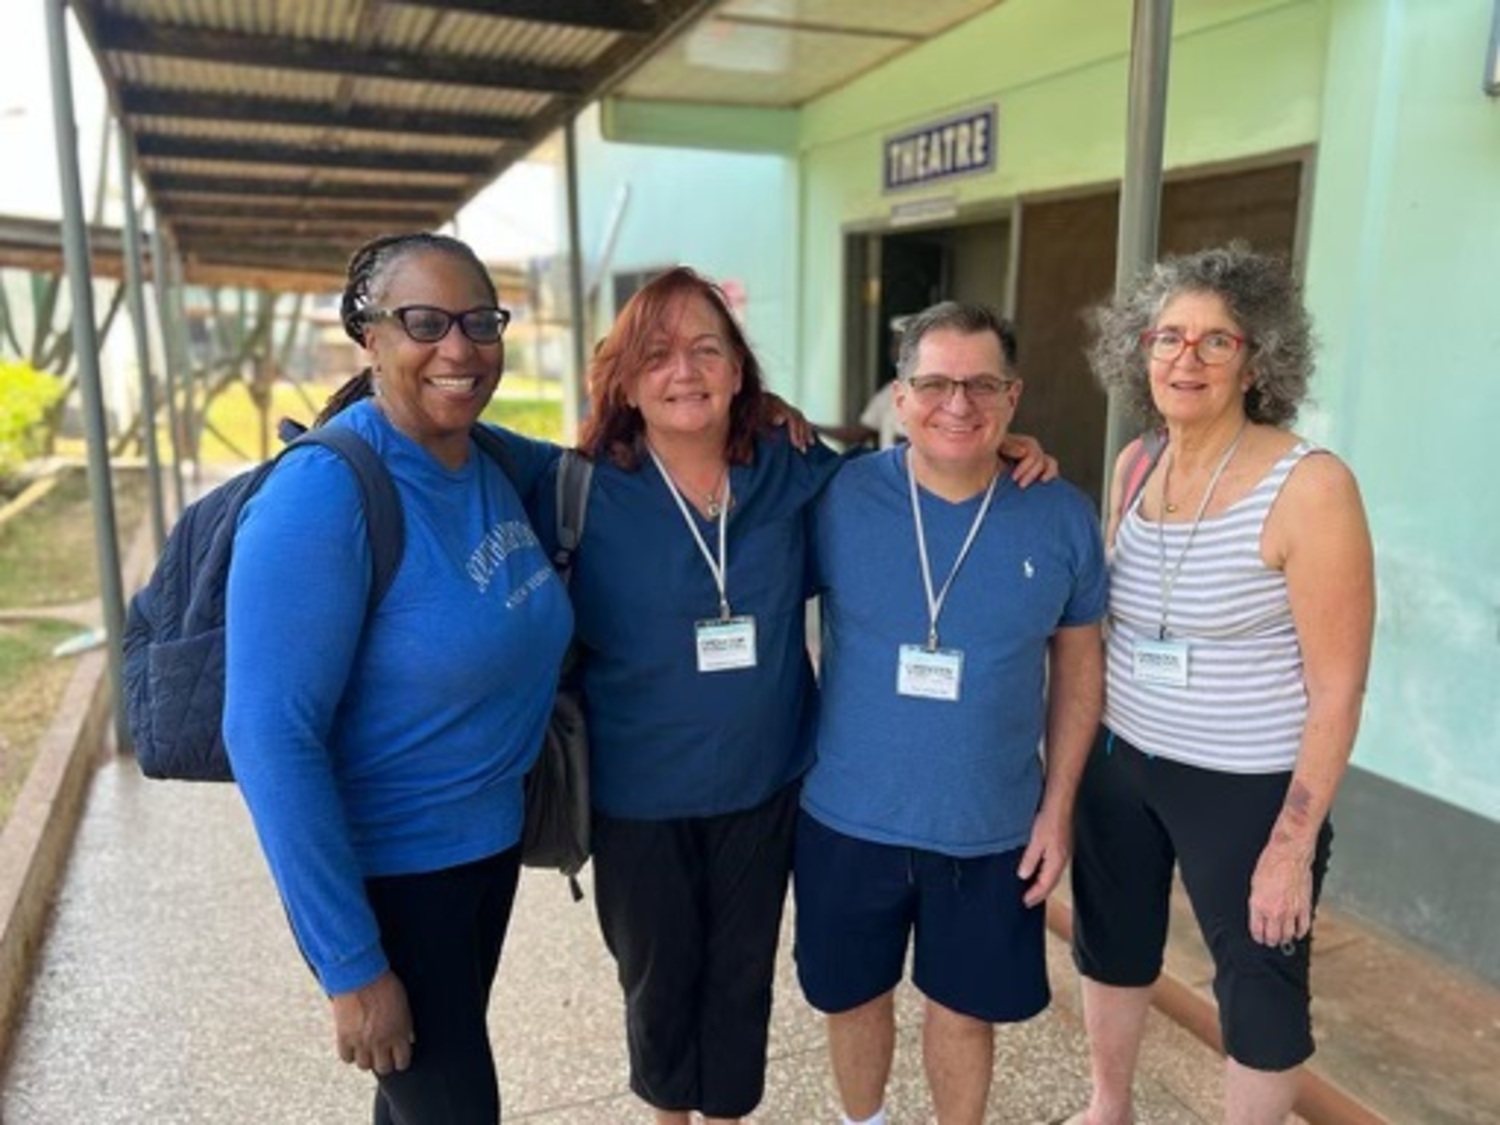 From left, Dr. Florence Rolston, Dr. Adriann Combs, Dr. Vito Alamia and Dr. Deborah Davenport. Rolston, Alamia and Davenport performed surgeries over the course of five days in Ghana, while Dr. Combs taught neonatal resuscitation to the team of doctors and nurses at the regional hospital in Ghana.